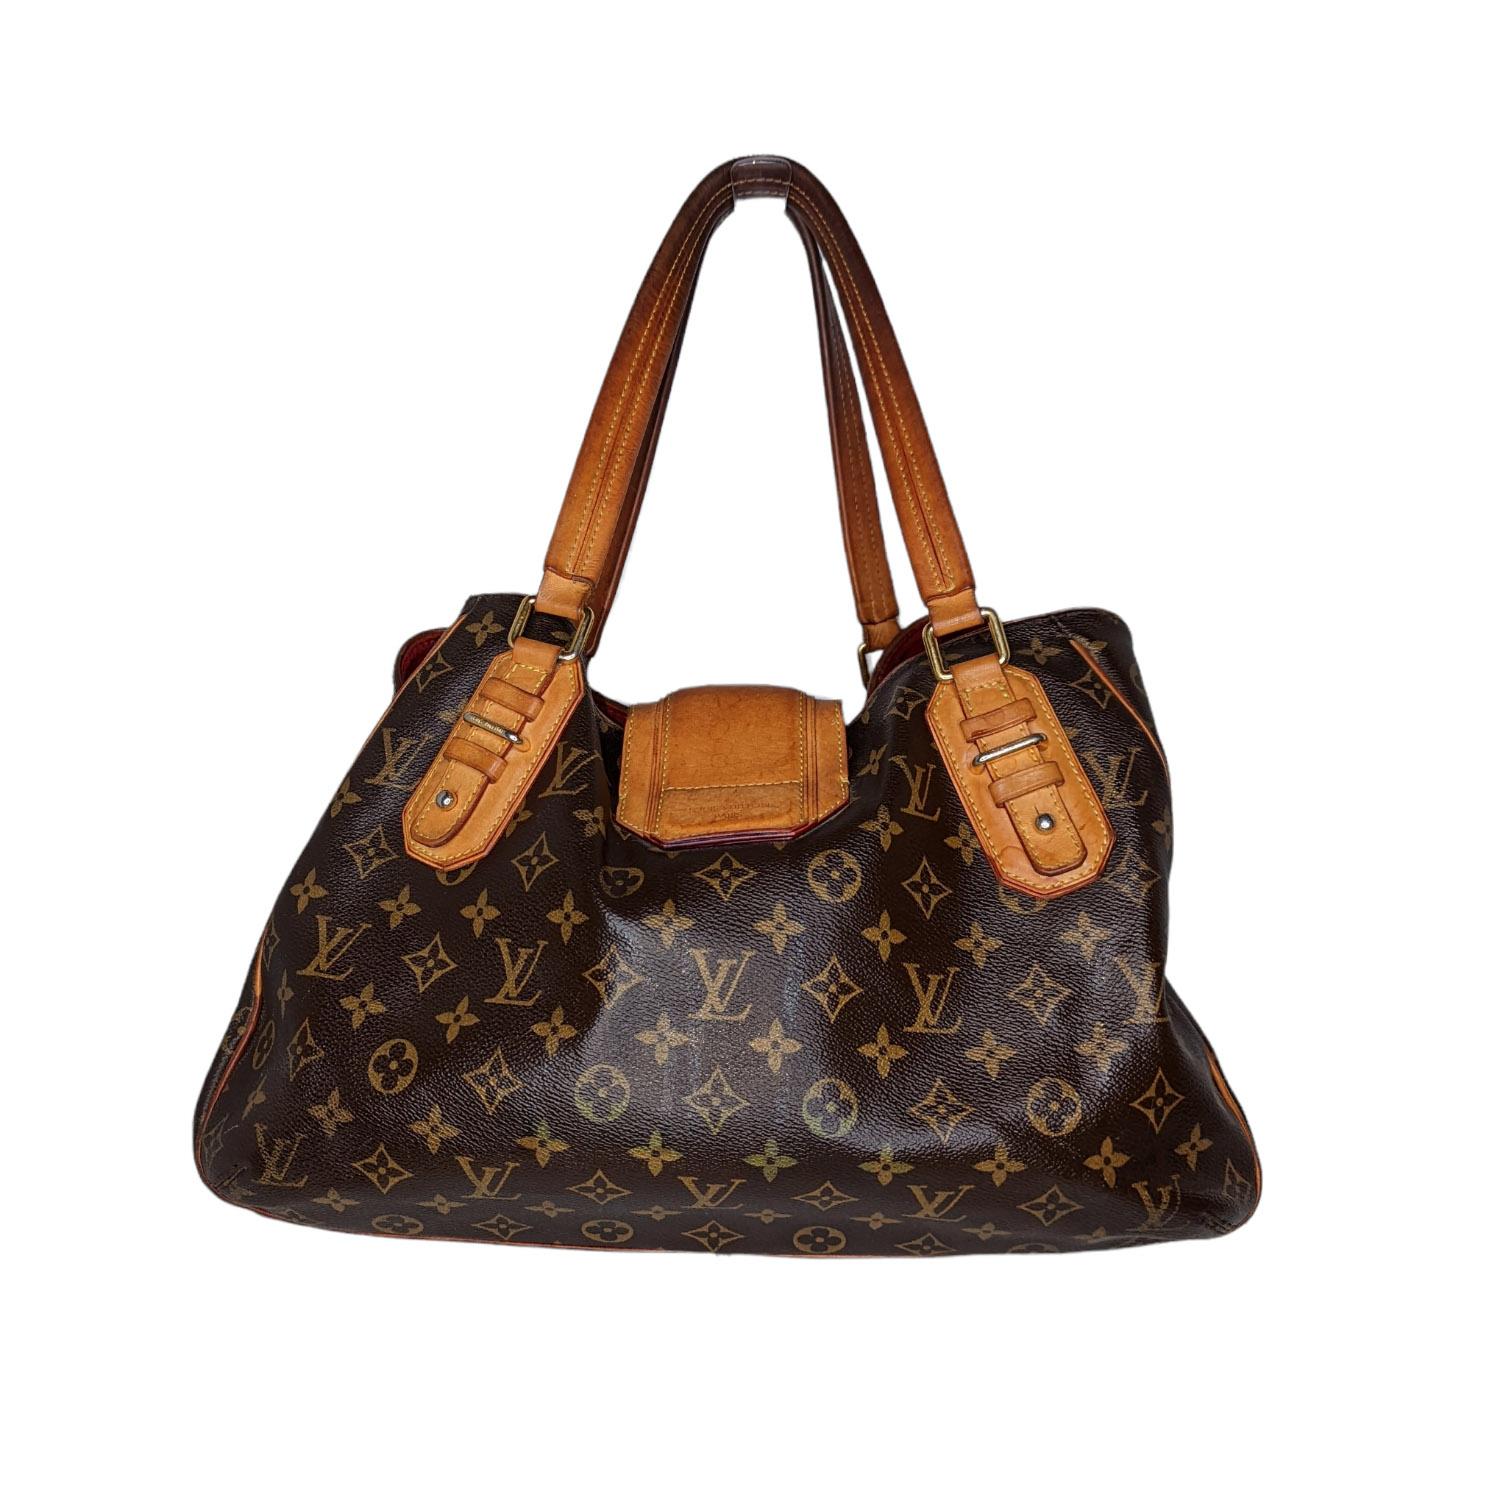 Don't miss out on your opportunity to own this hard-to-find Louis Vuitton Monogram Canvas Griet Bag. It features an ultra-spacious interior with three separate compartments including a secured middle zip compartment. This sleek tote will be your new